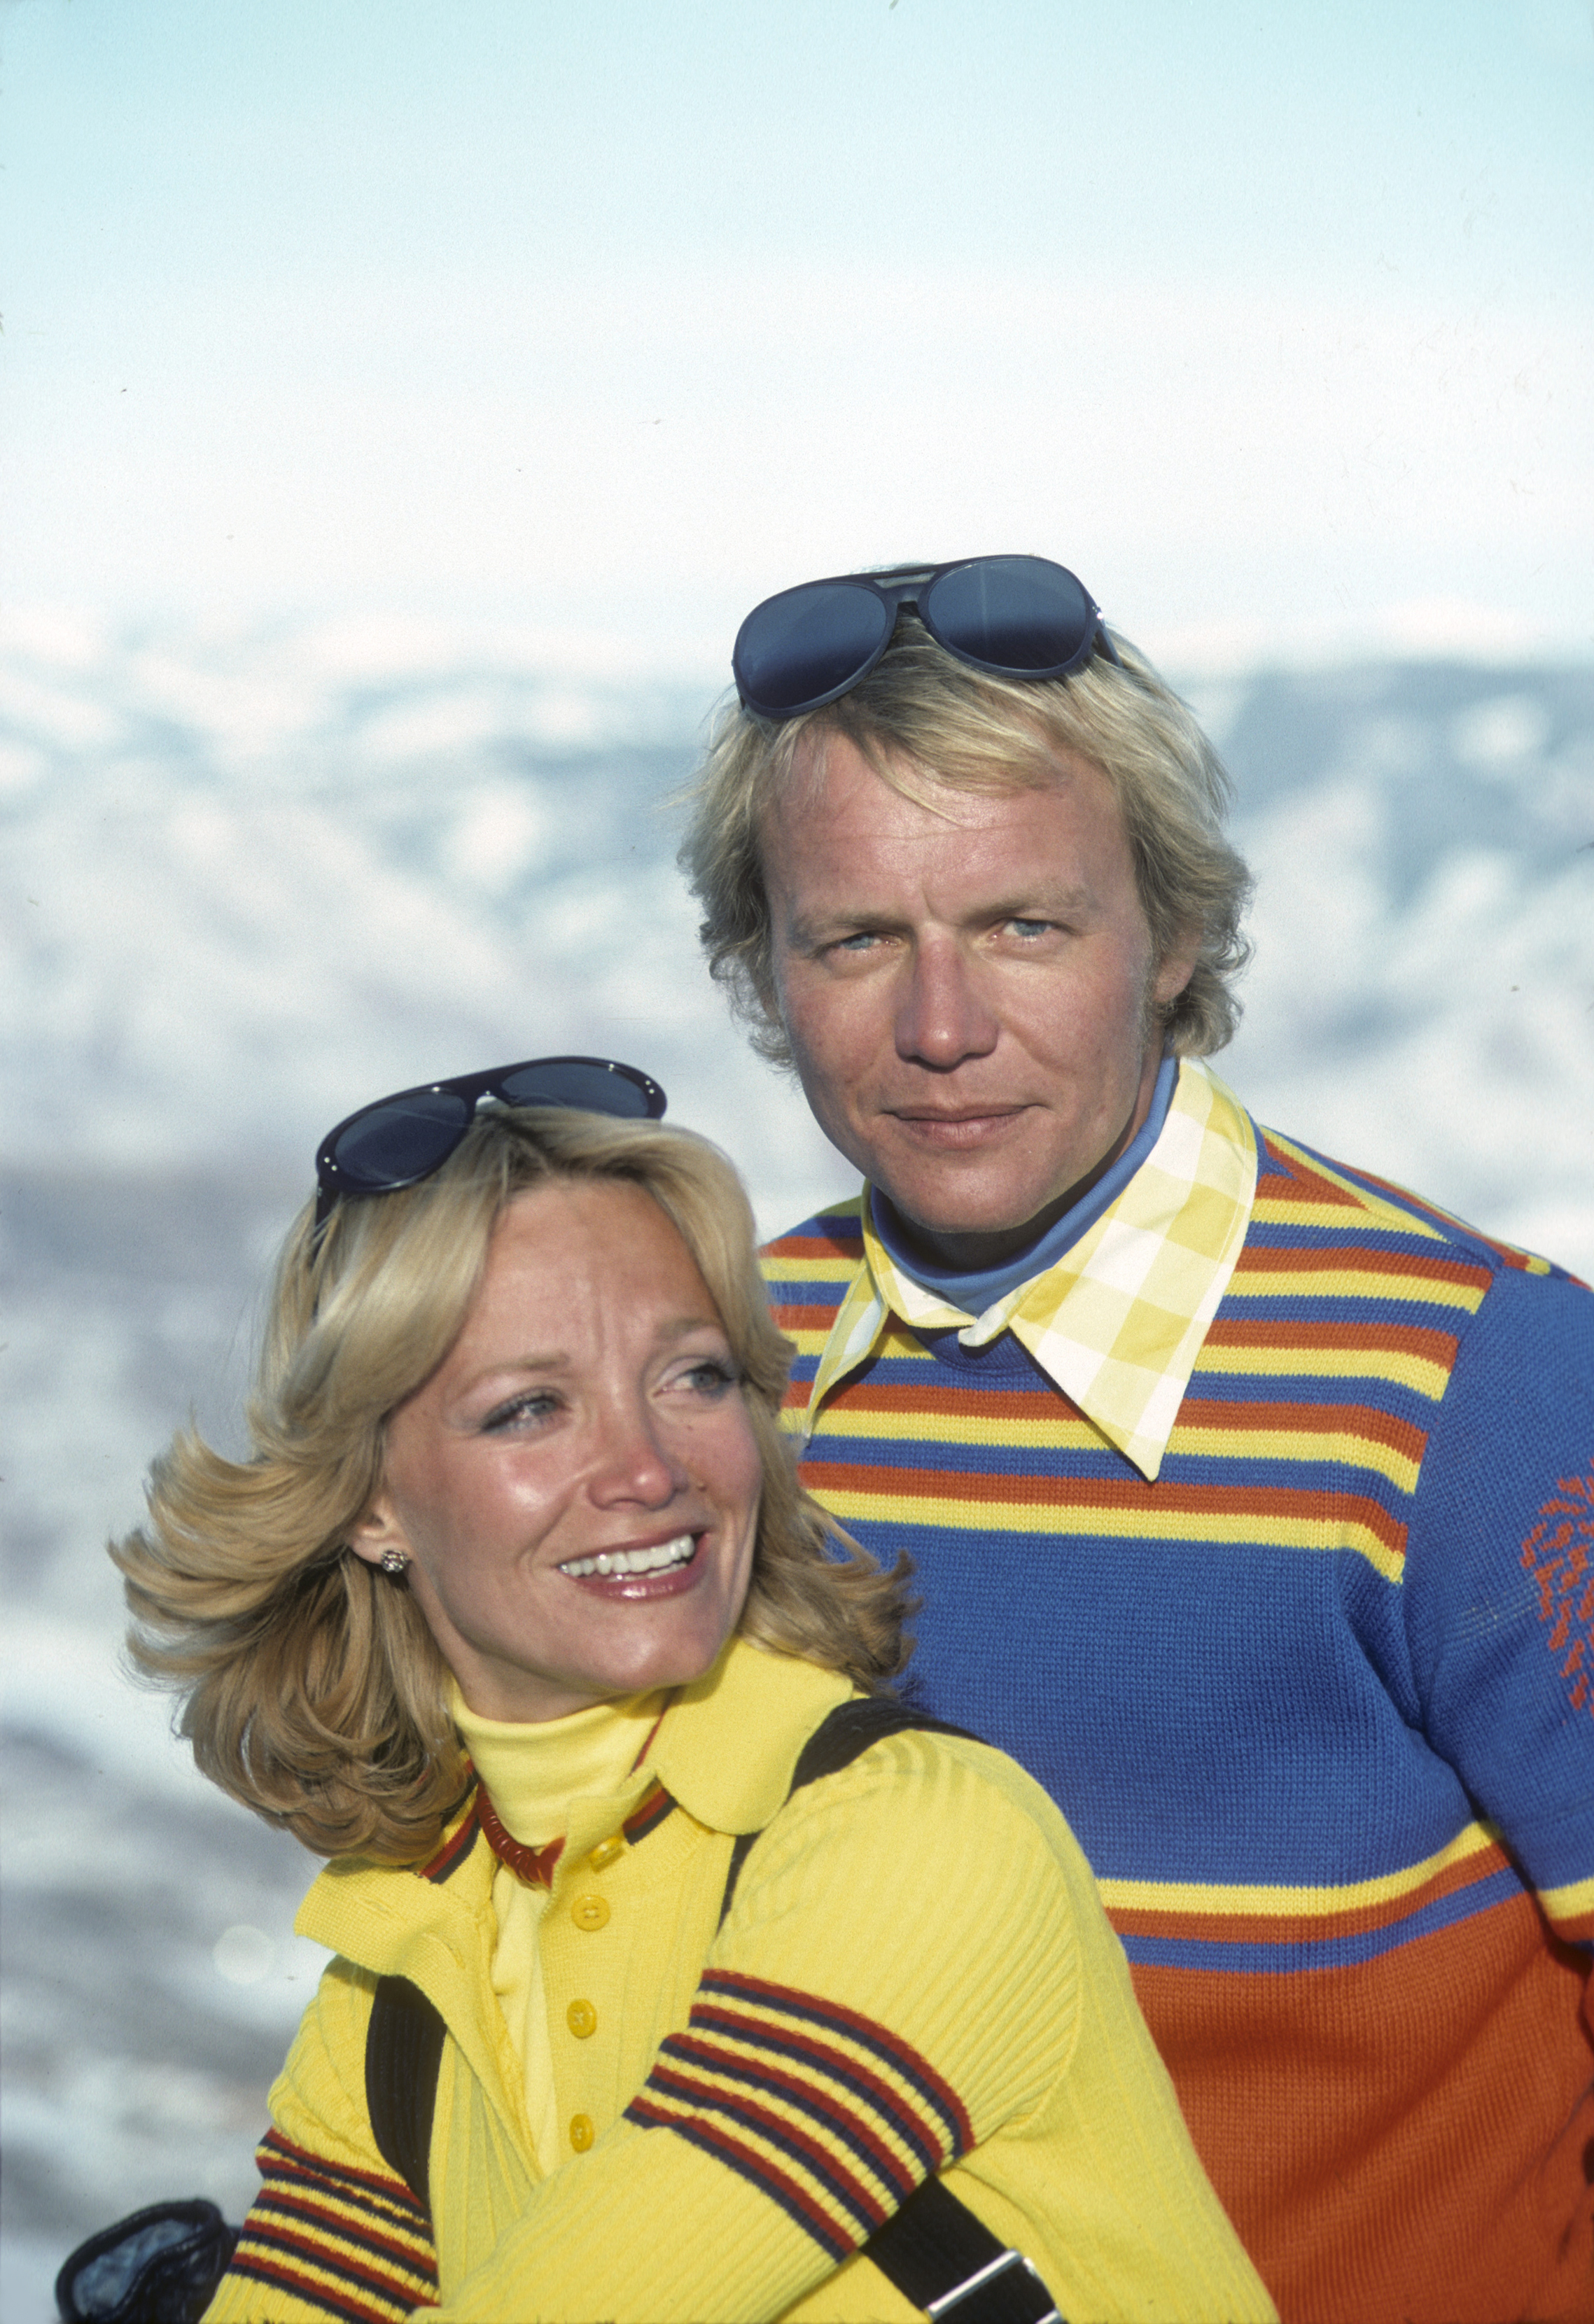 Karen Carlson and David Soul on vacation, skiing in Aspen in 1976 | Source: Getty Images